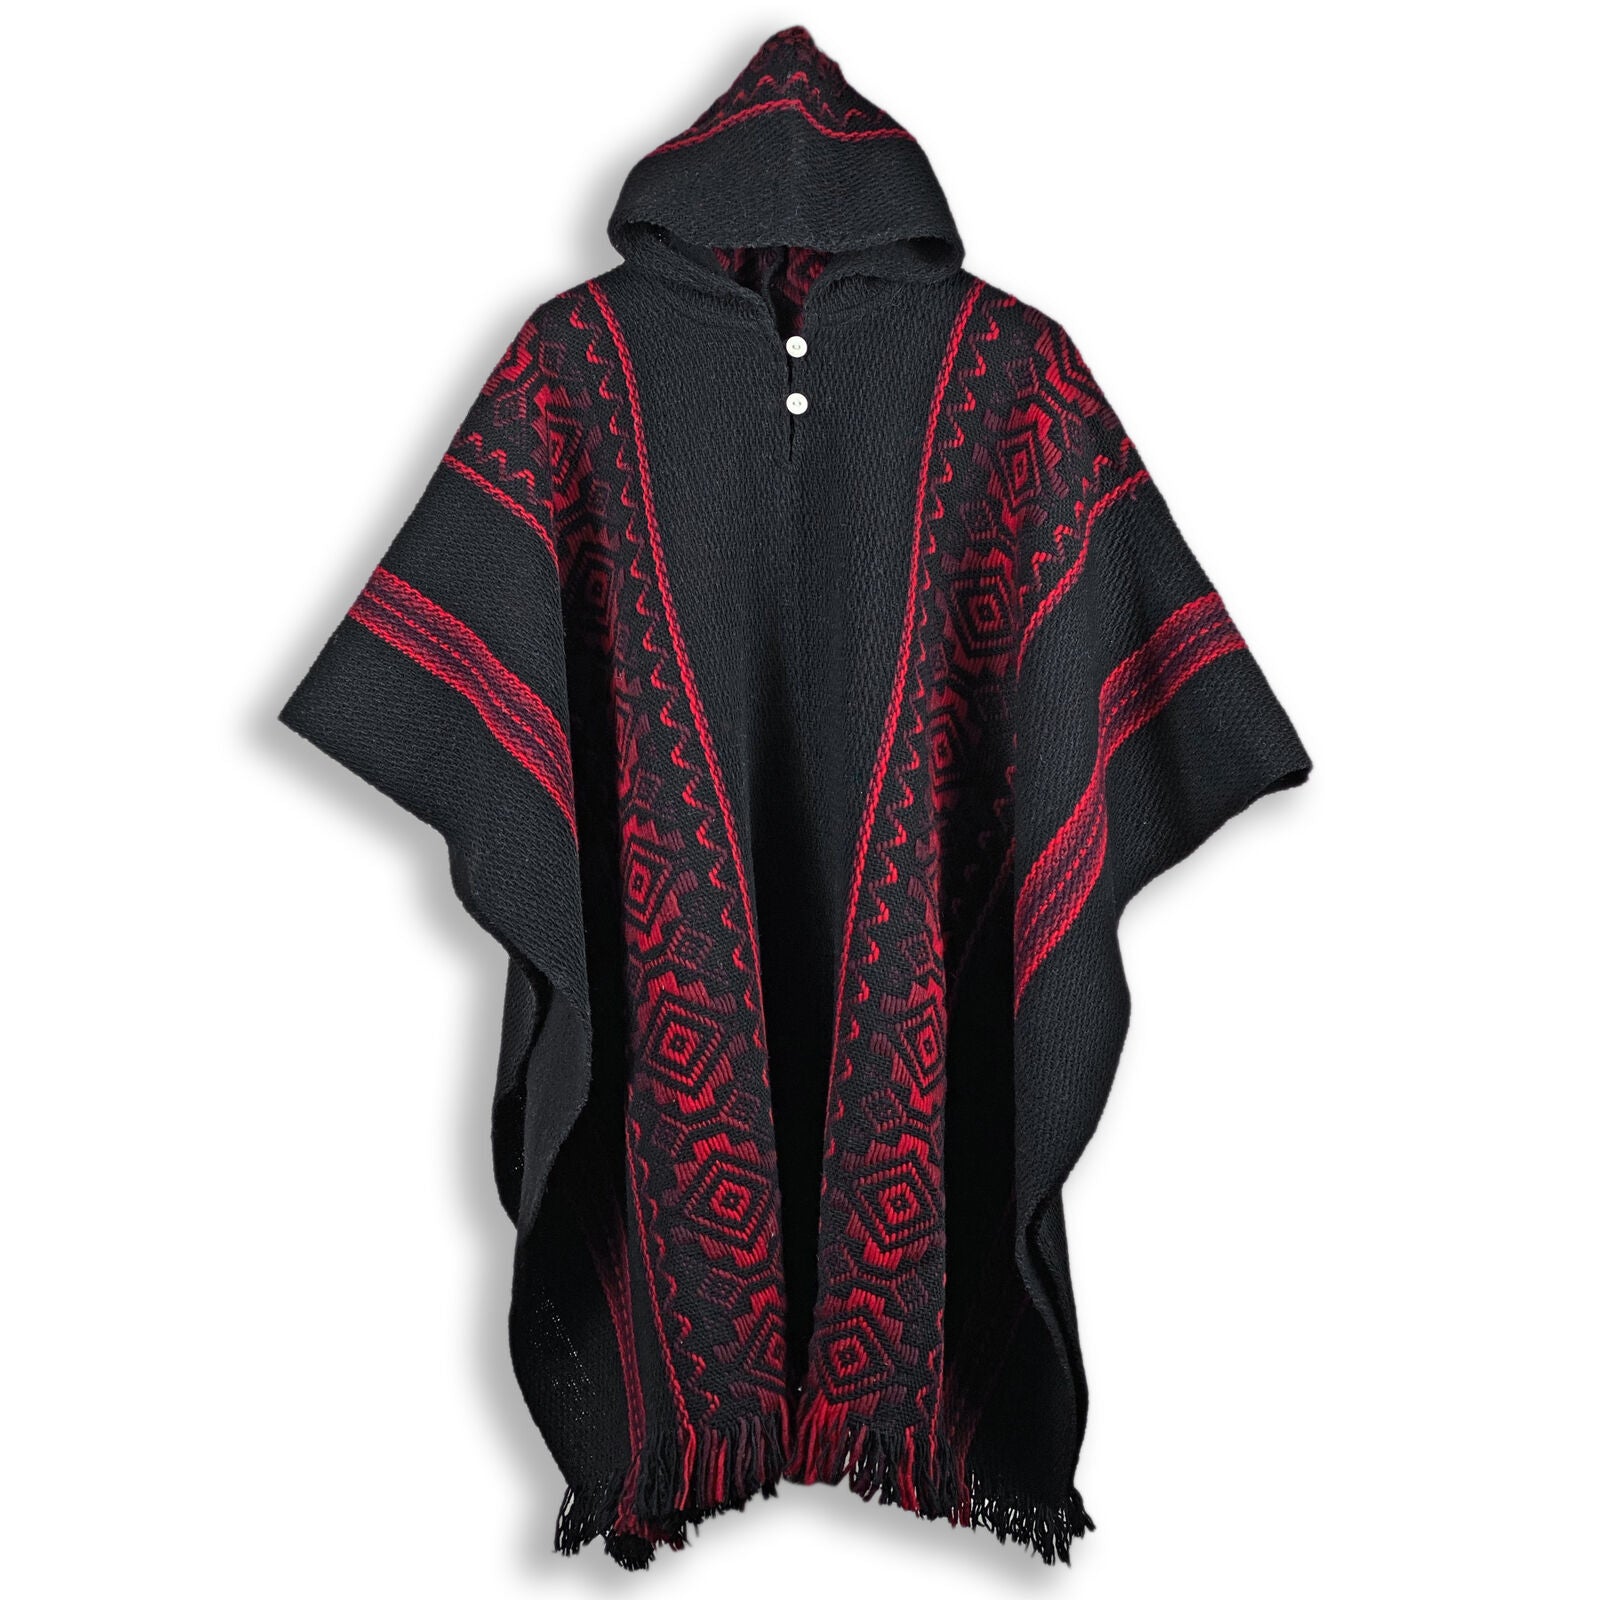 Llama Wool Unisex South American Handwoven Hooded Poncho - solid black with red diamonds pattern